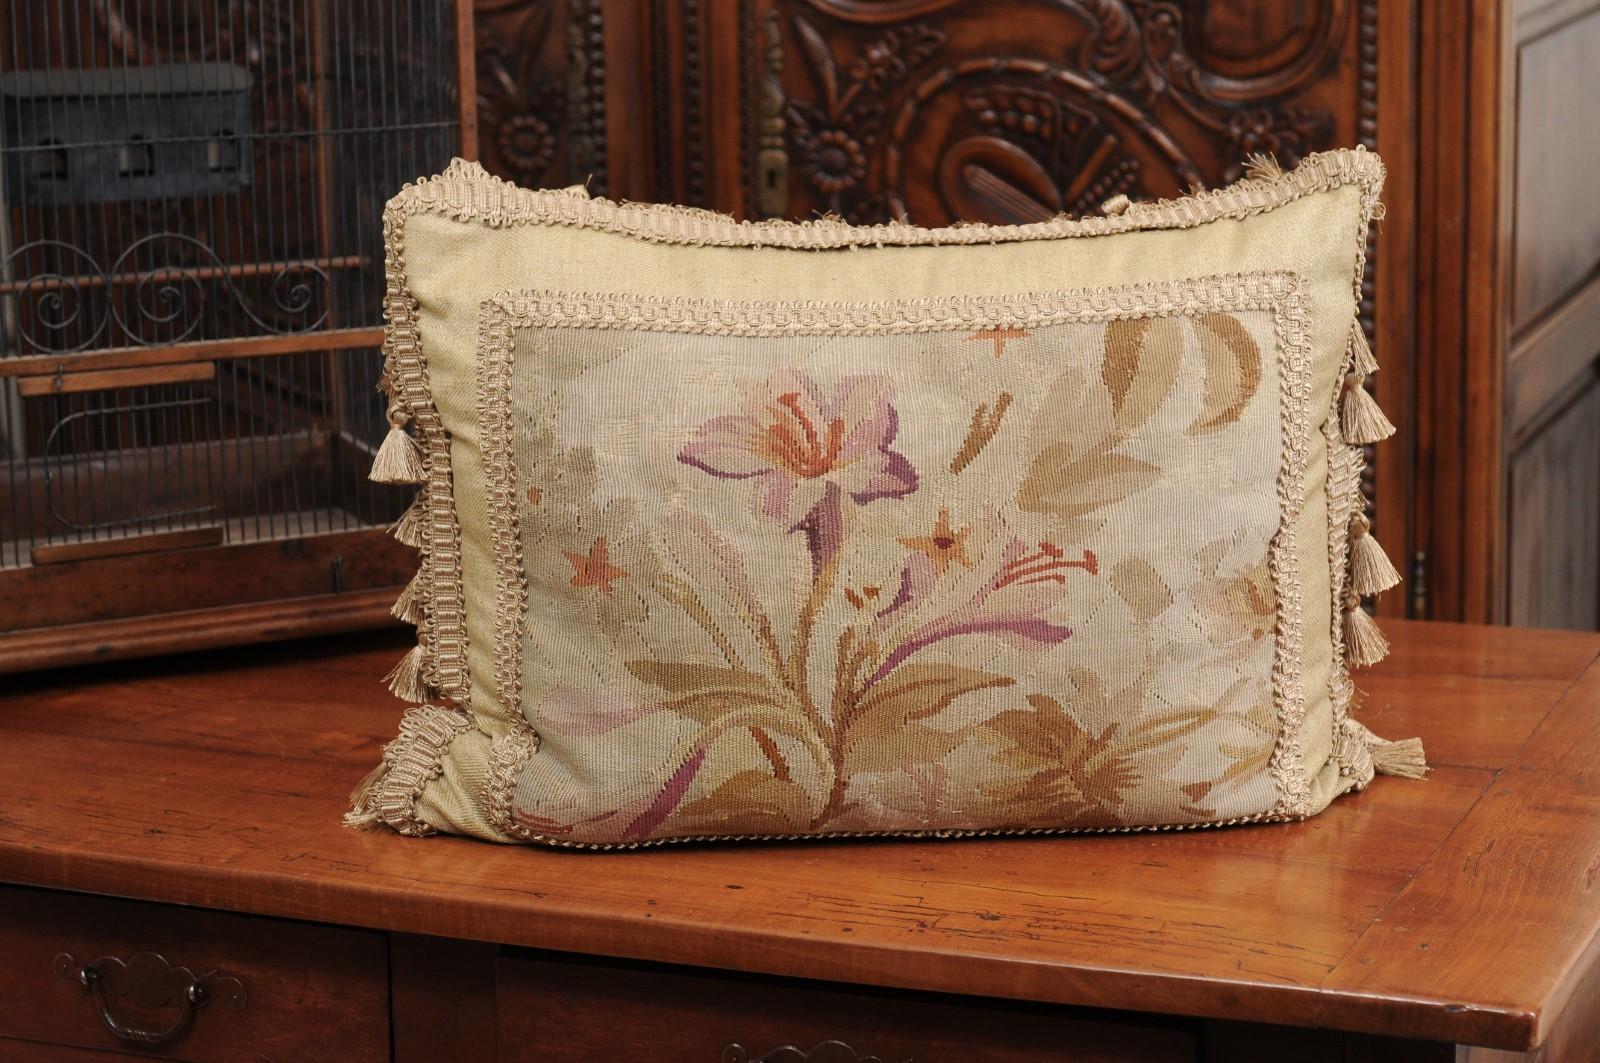 A French pillow made from 19th century Aubusson tapestry, with floral decor, gallon trim and tassels. Made from an exquisite tapestry created during the 19th century in the Aubusson manufacture located in central France, this horizontal pillow is